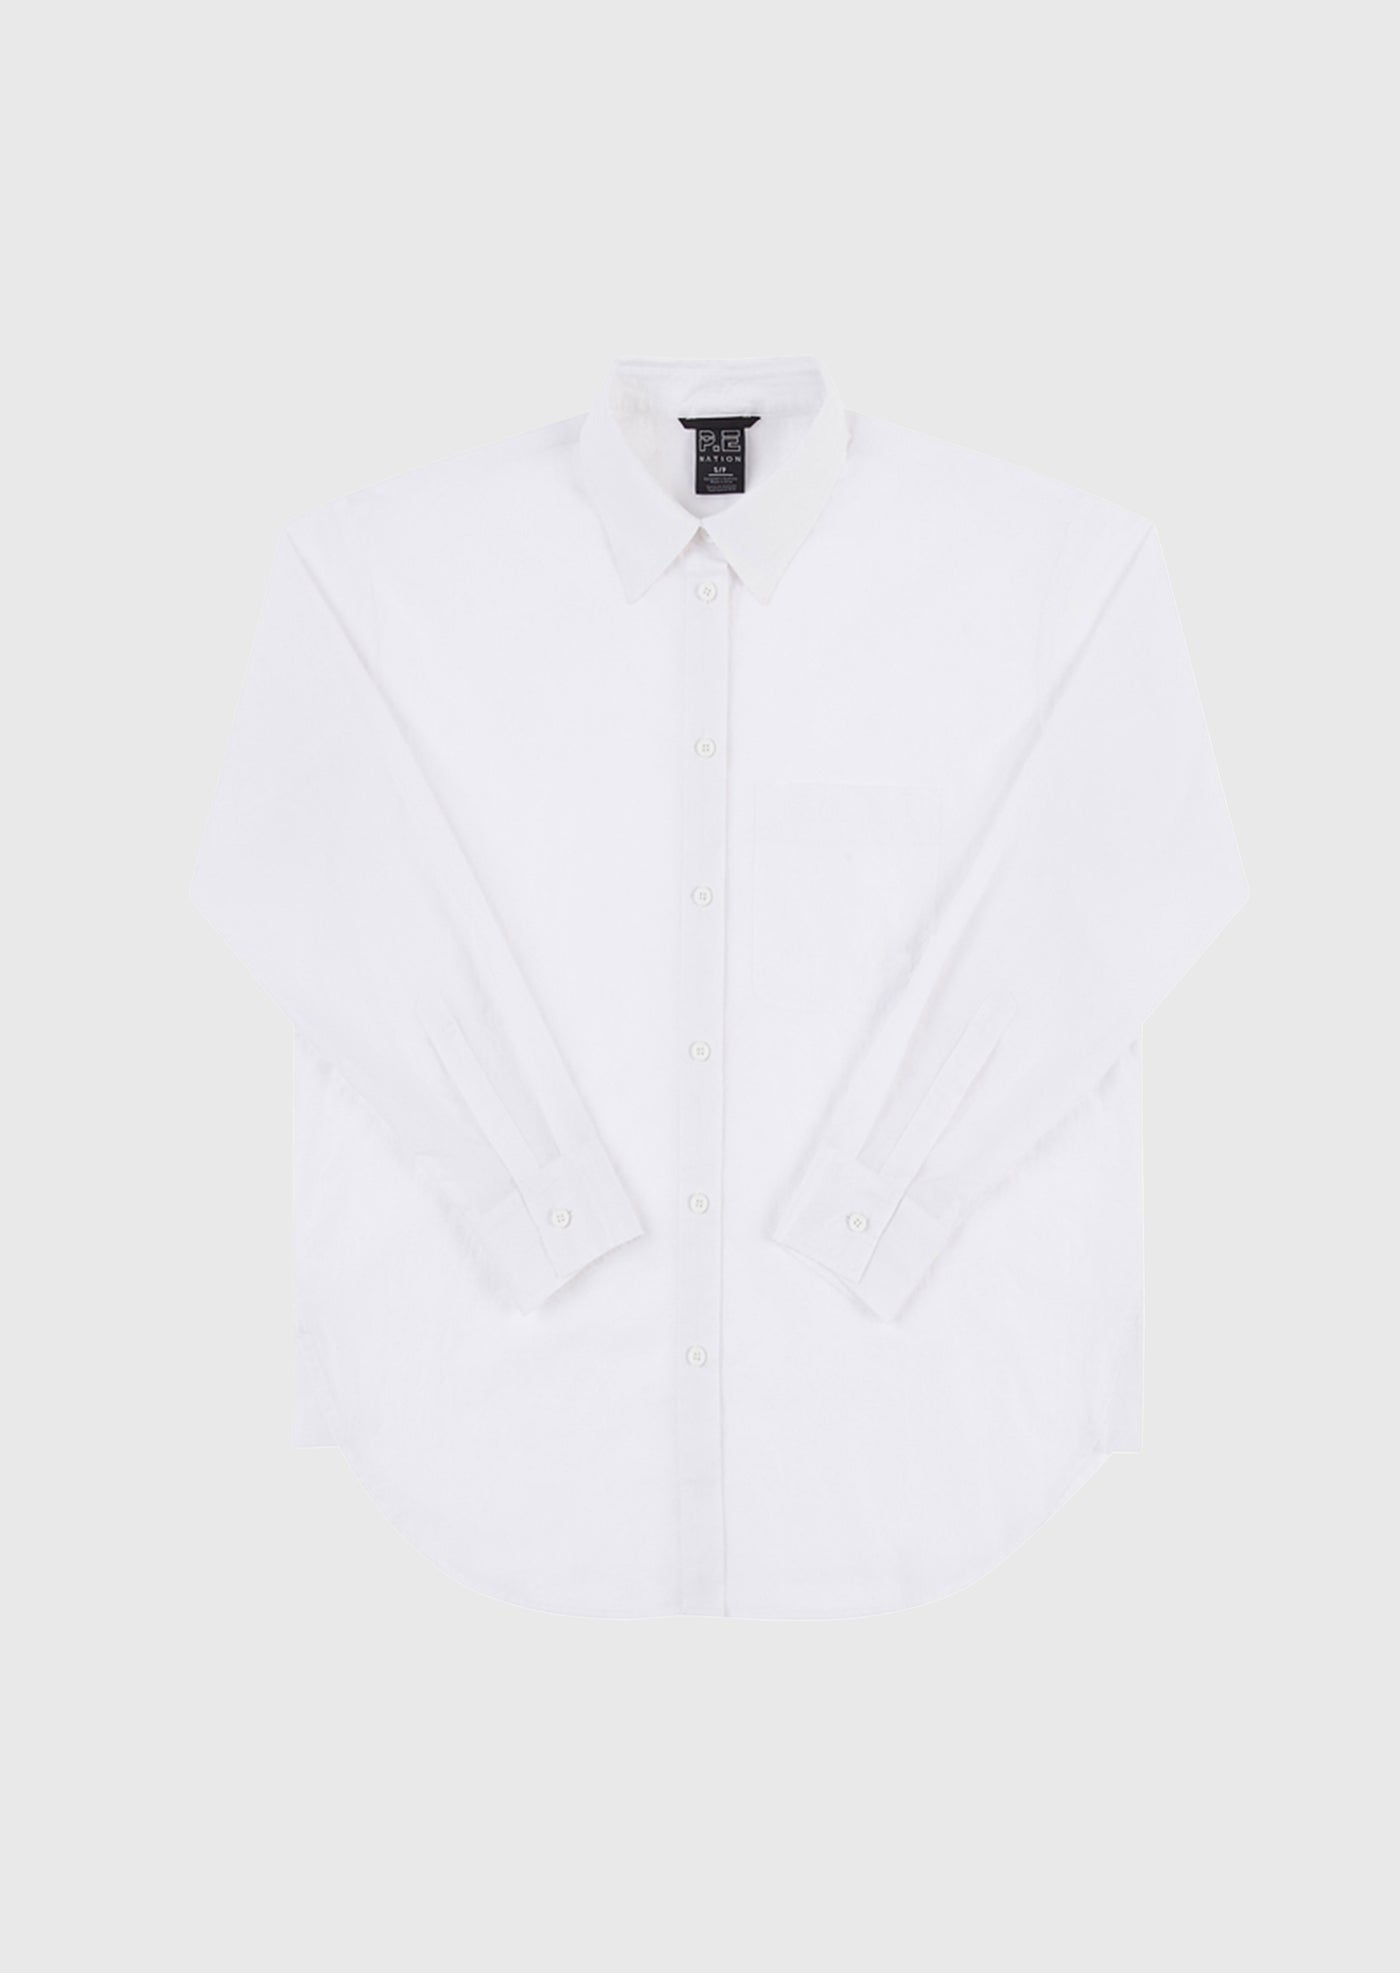 INTERVAL SHIRT IN OPTIC WHITE